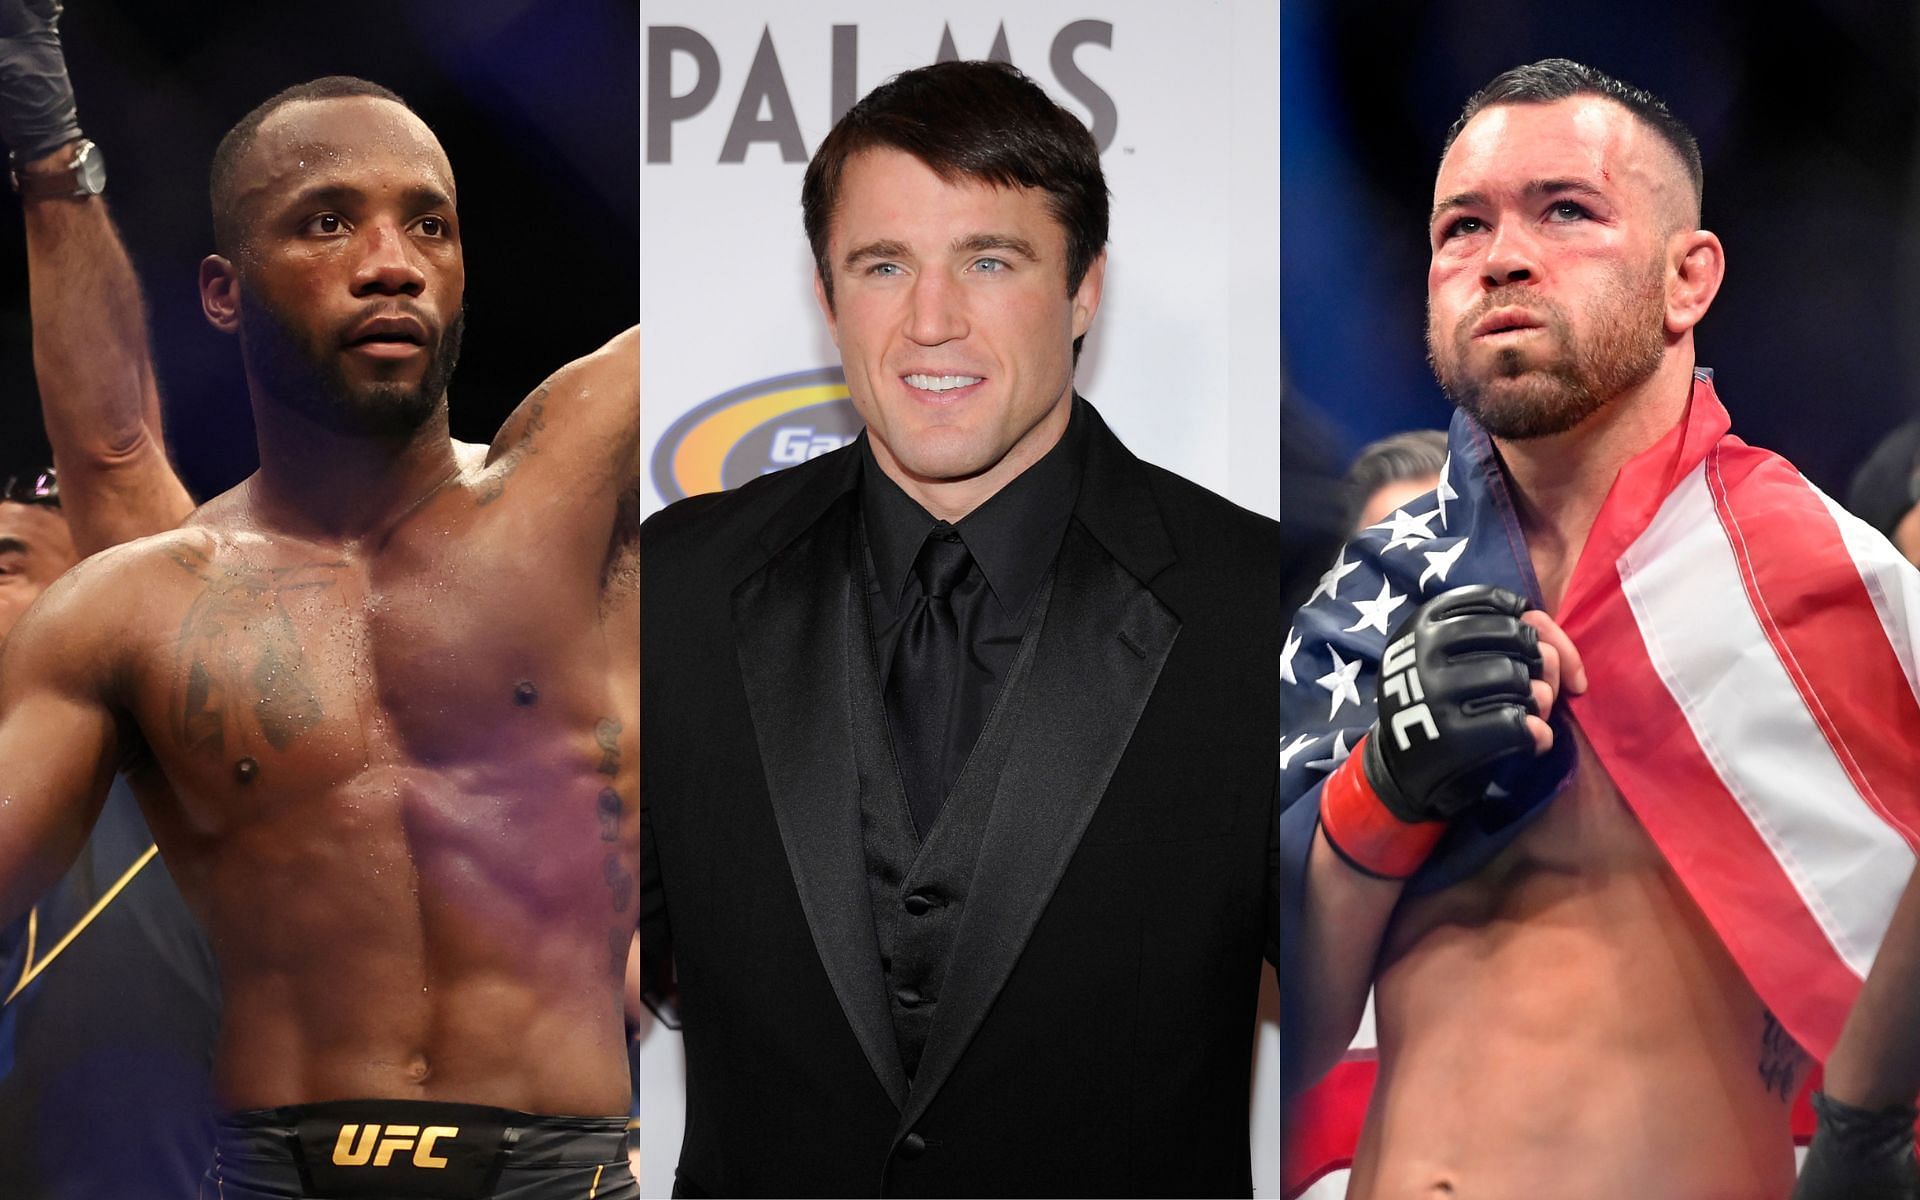 Leon Edwards (Left), Chael Sonnen (Middle), and Colby Covington (Right)